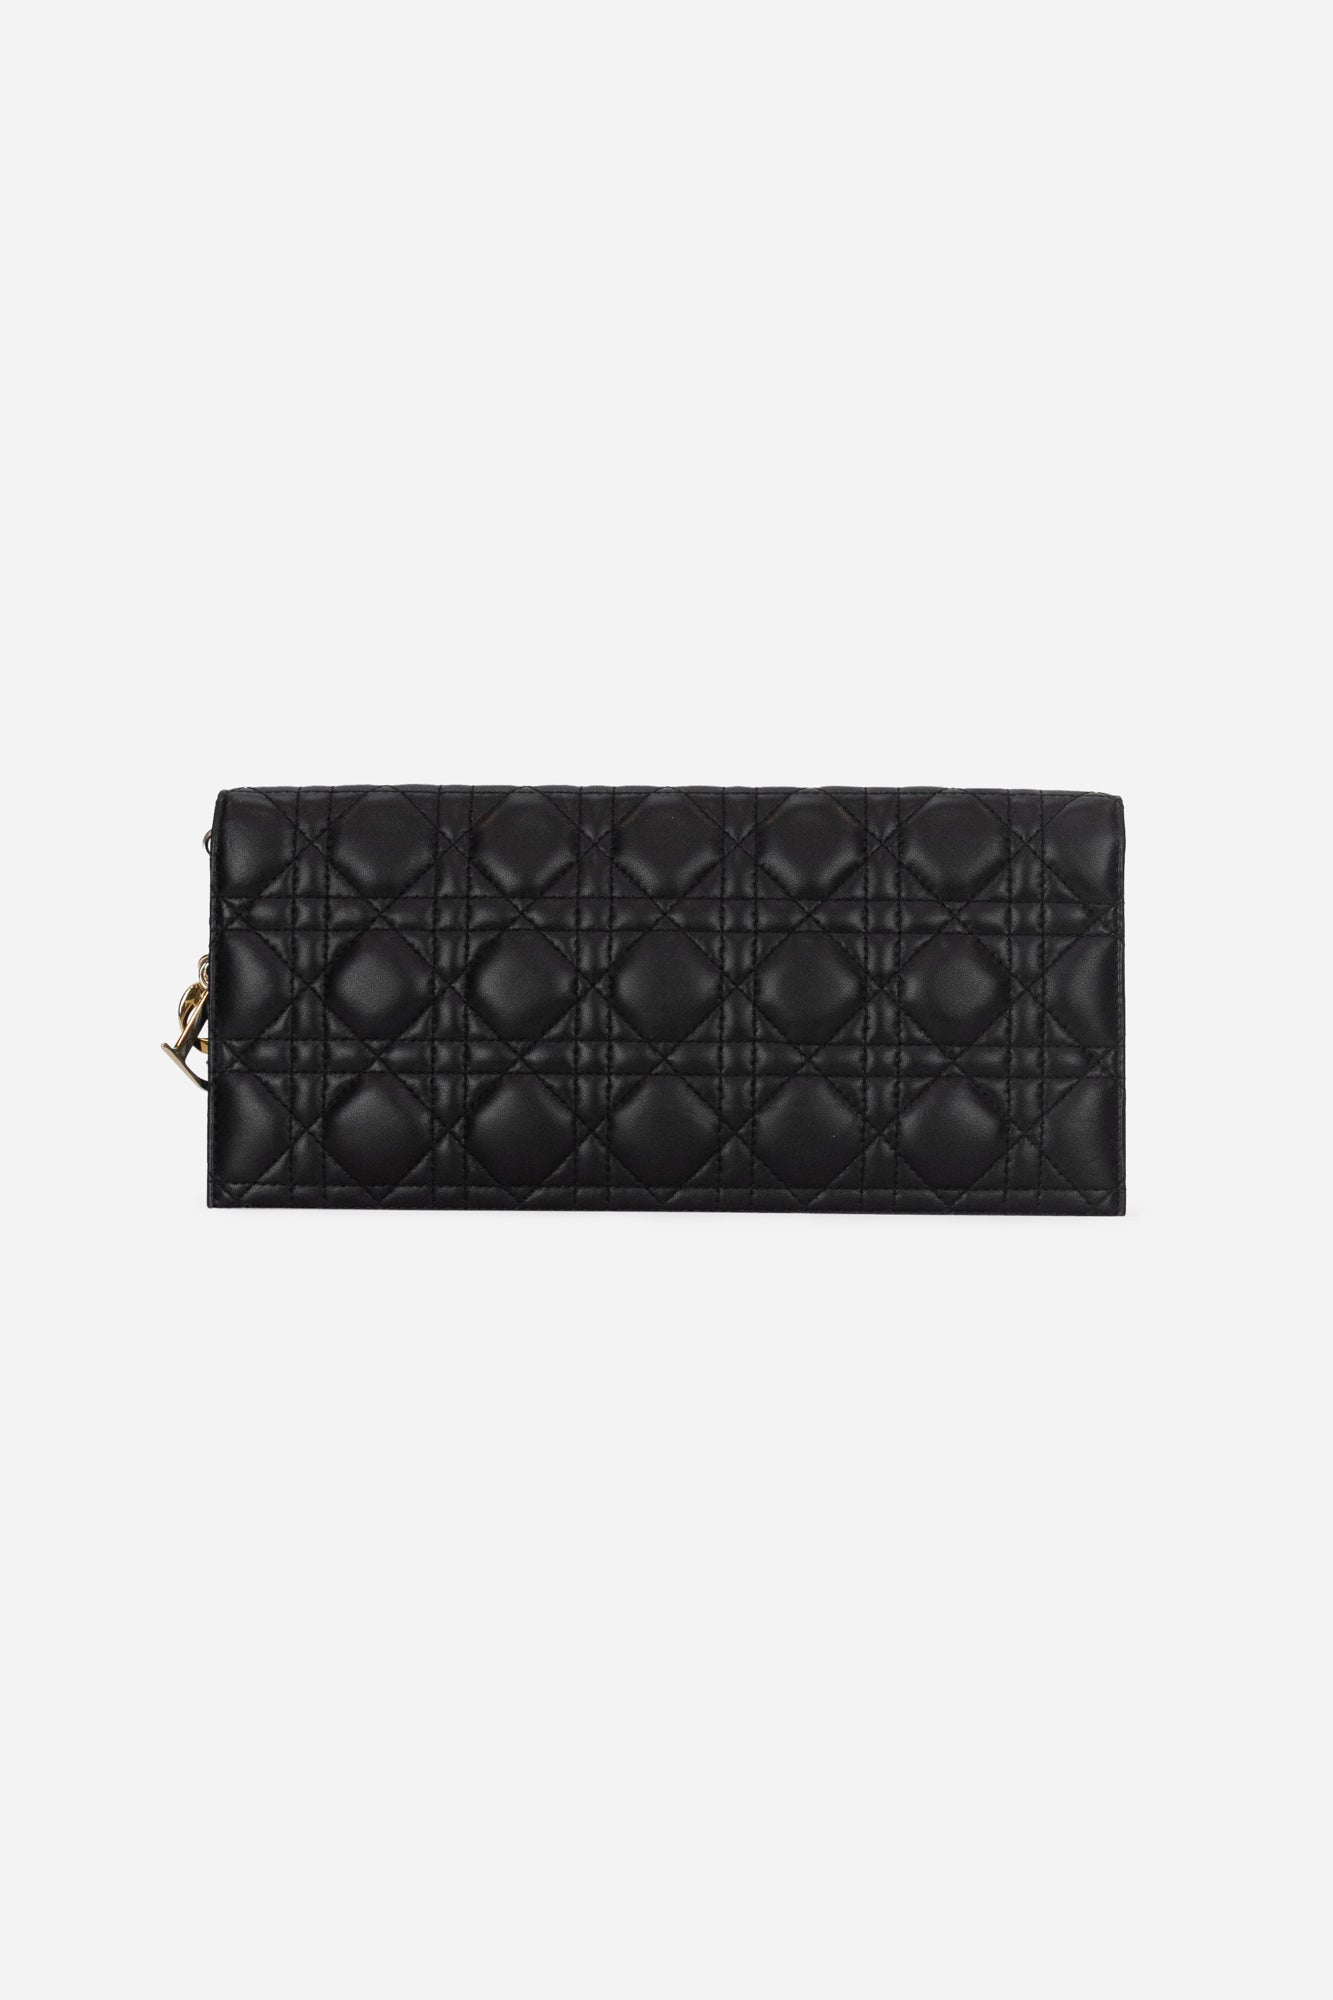 Lady Dior Cannage Black Lambskin Wallet on Chain